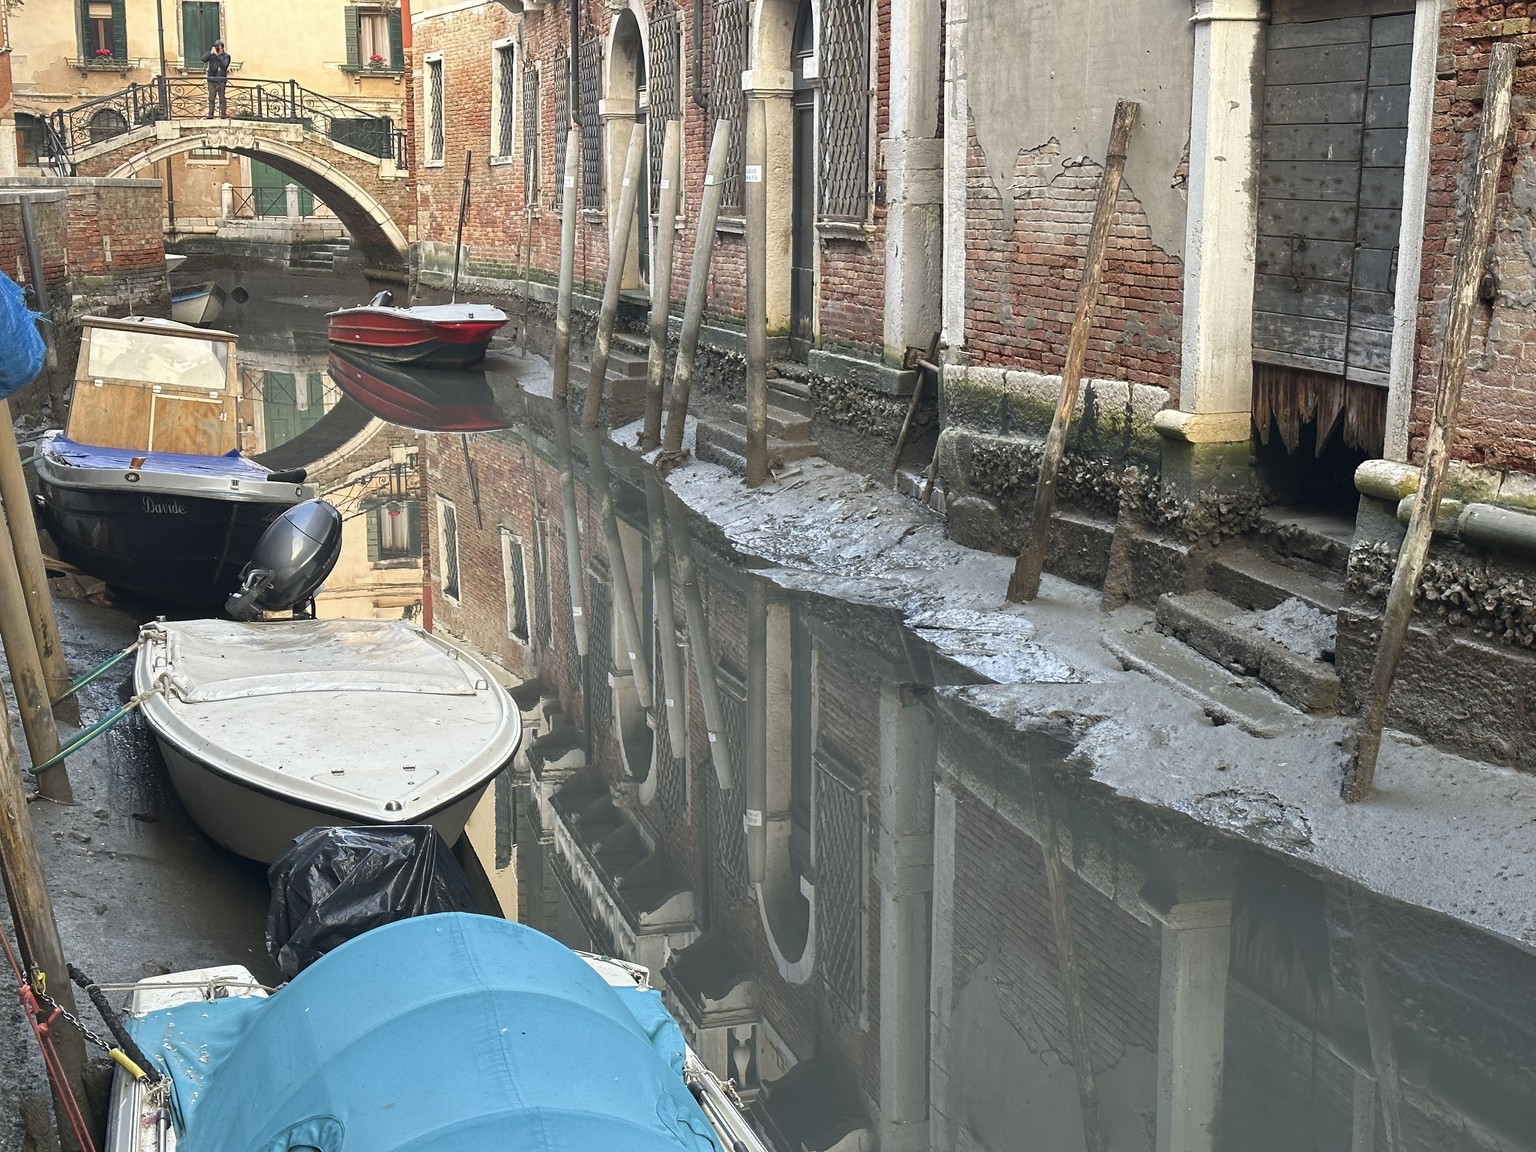 Boats are docked on a dry canal during a low tide in Venice, Italy, Monday, Feb. 20, 2023. (AP Photo/Luigi Costantini)